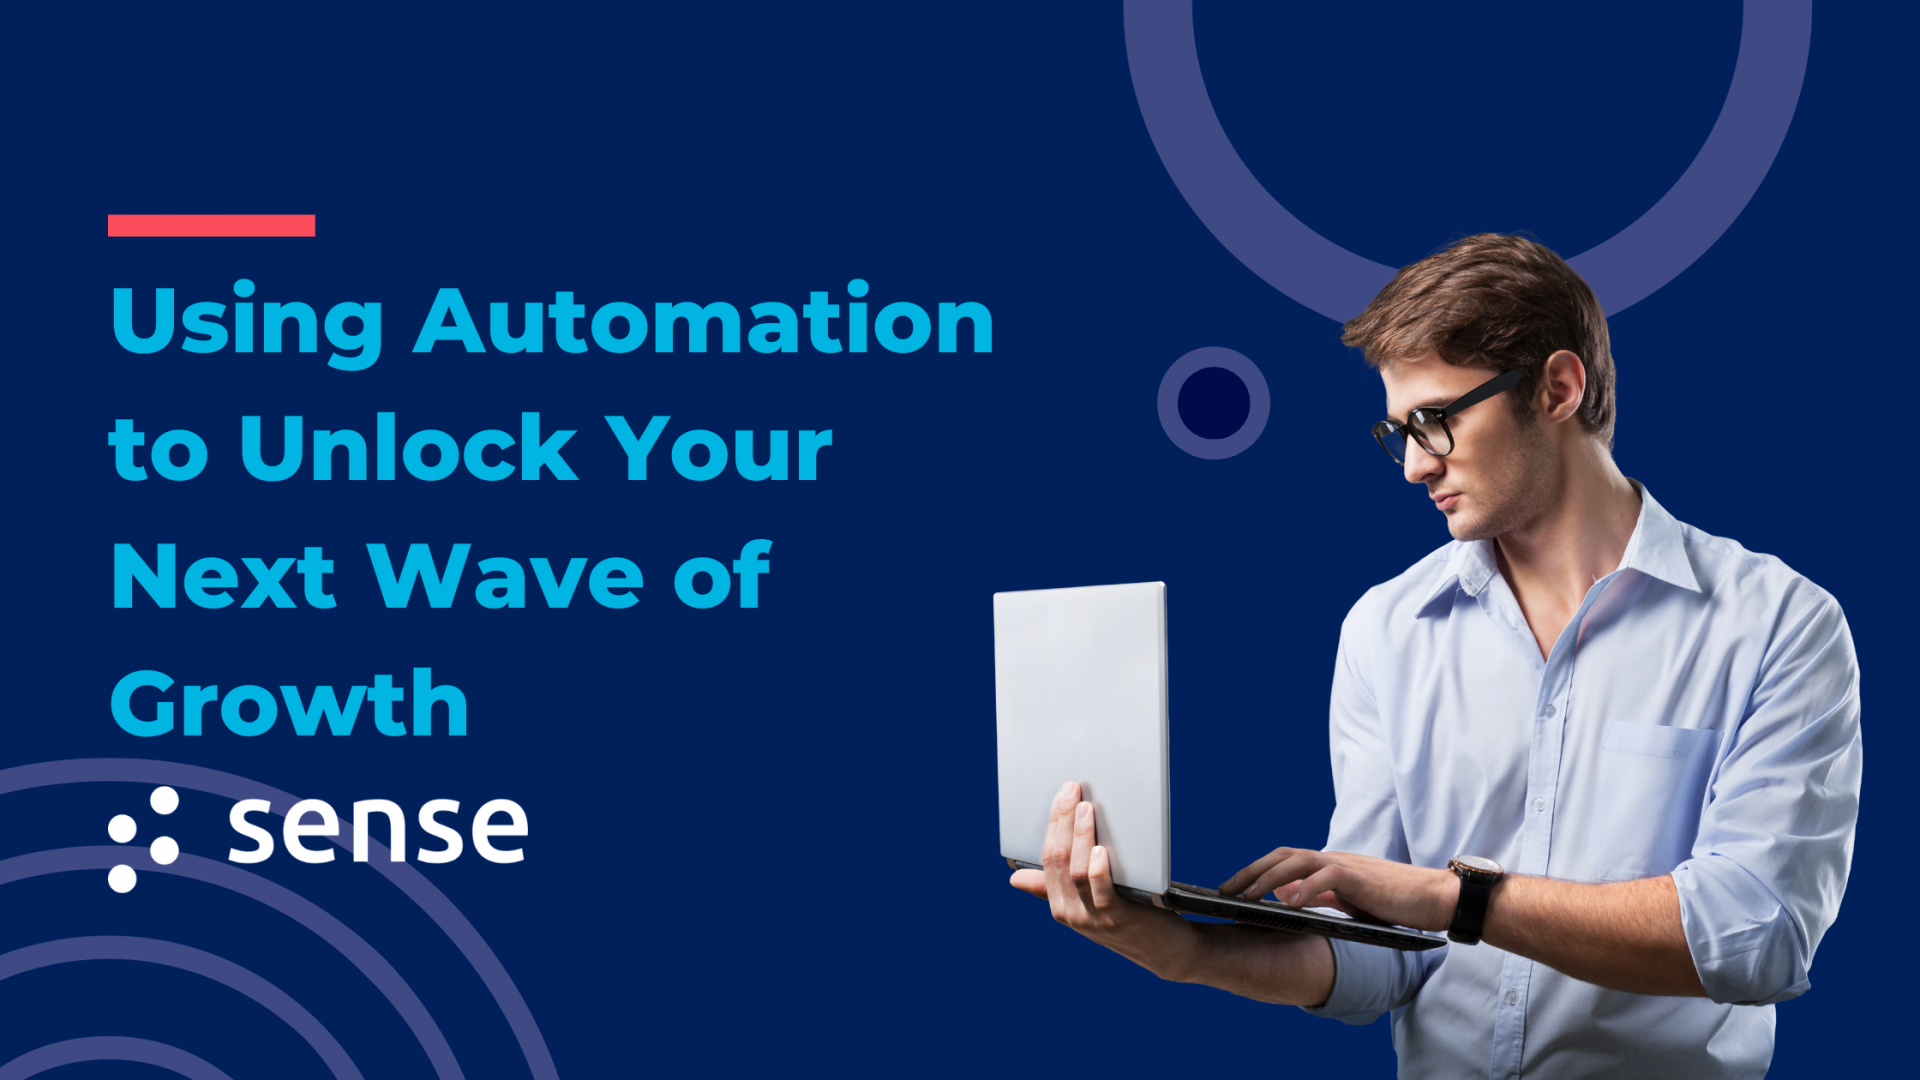 Using Automation to Unlock Your Next Wave of Growth